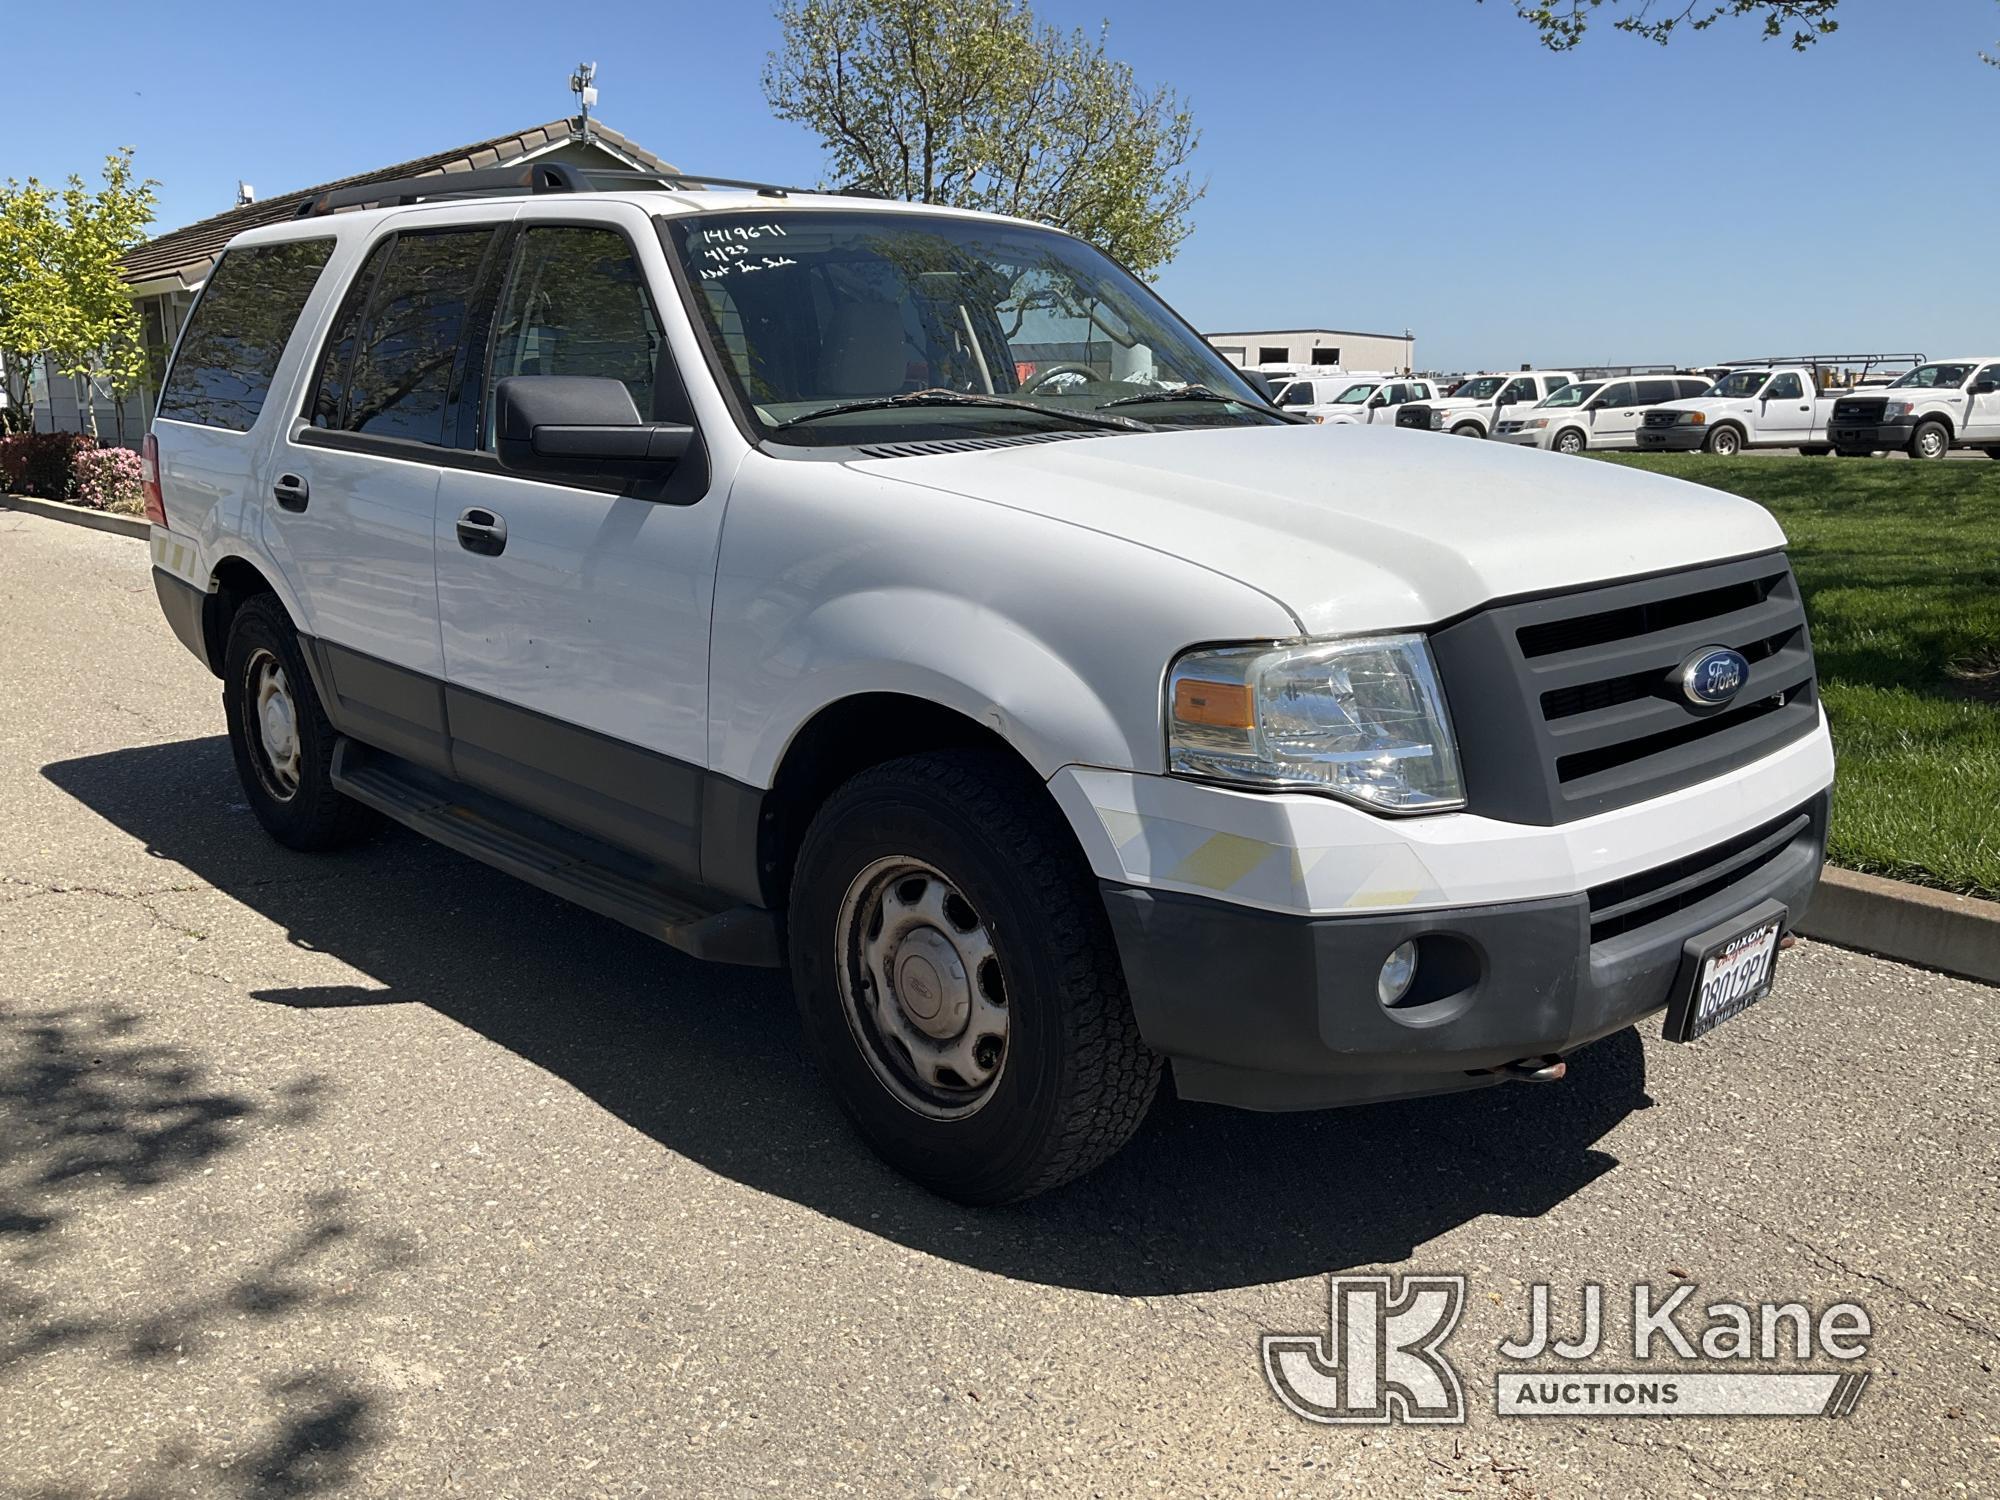 (Dixon, CA) 2014 Ford Expedition 4x4 4-Door Sport Utility Vehicle Runs & Moves) (Driver Window Will